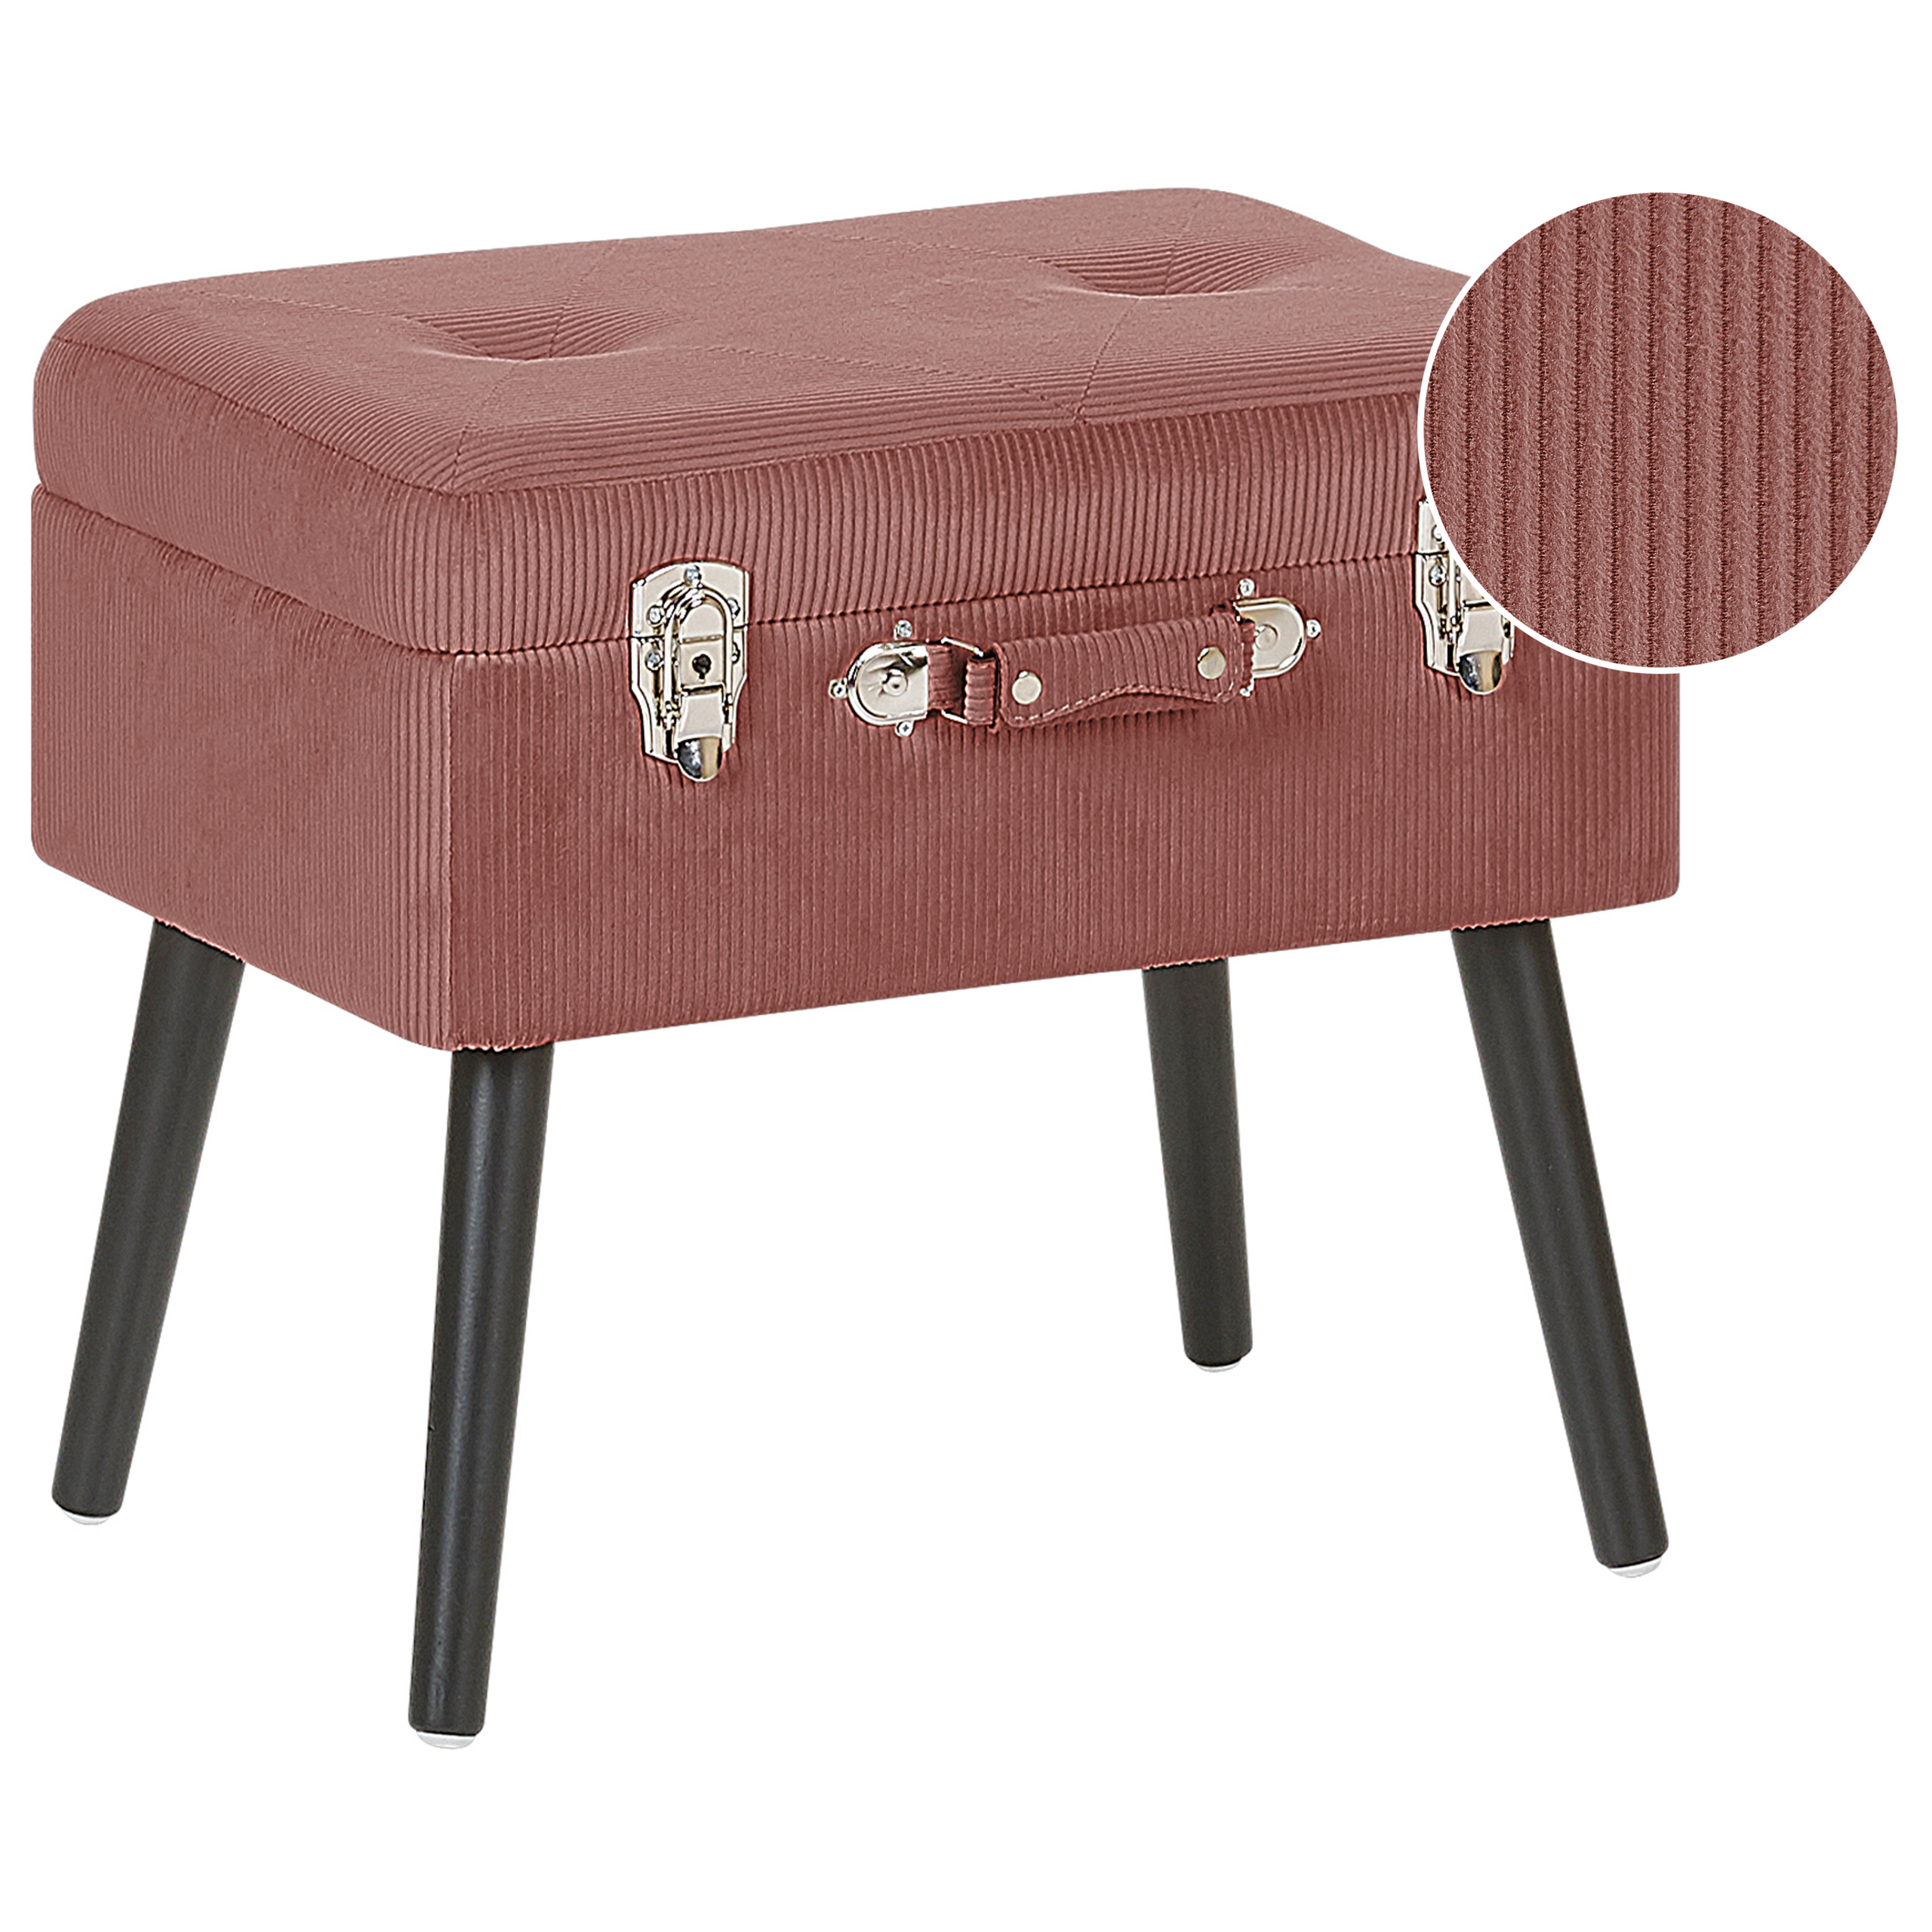 Beliani Stool with Storage Pink Corduroy Upholstered Black Legs Suitcase Design Buttoned Top